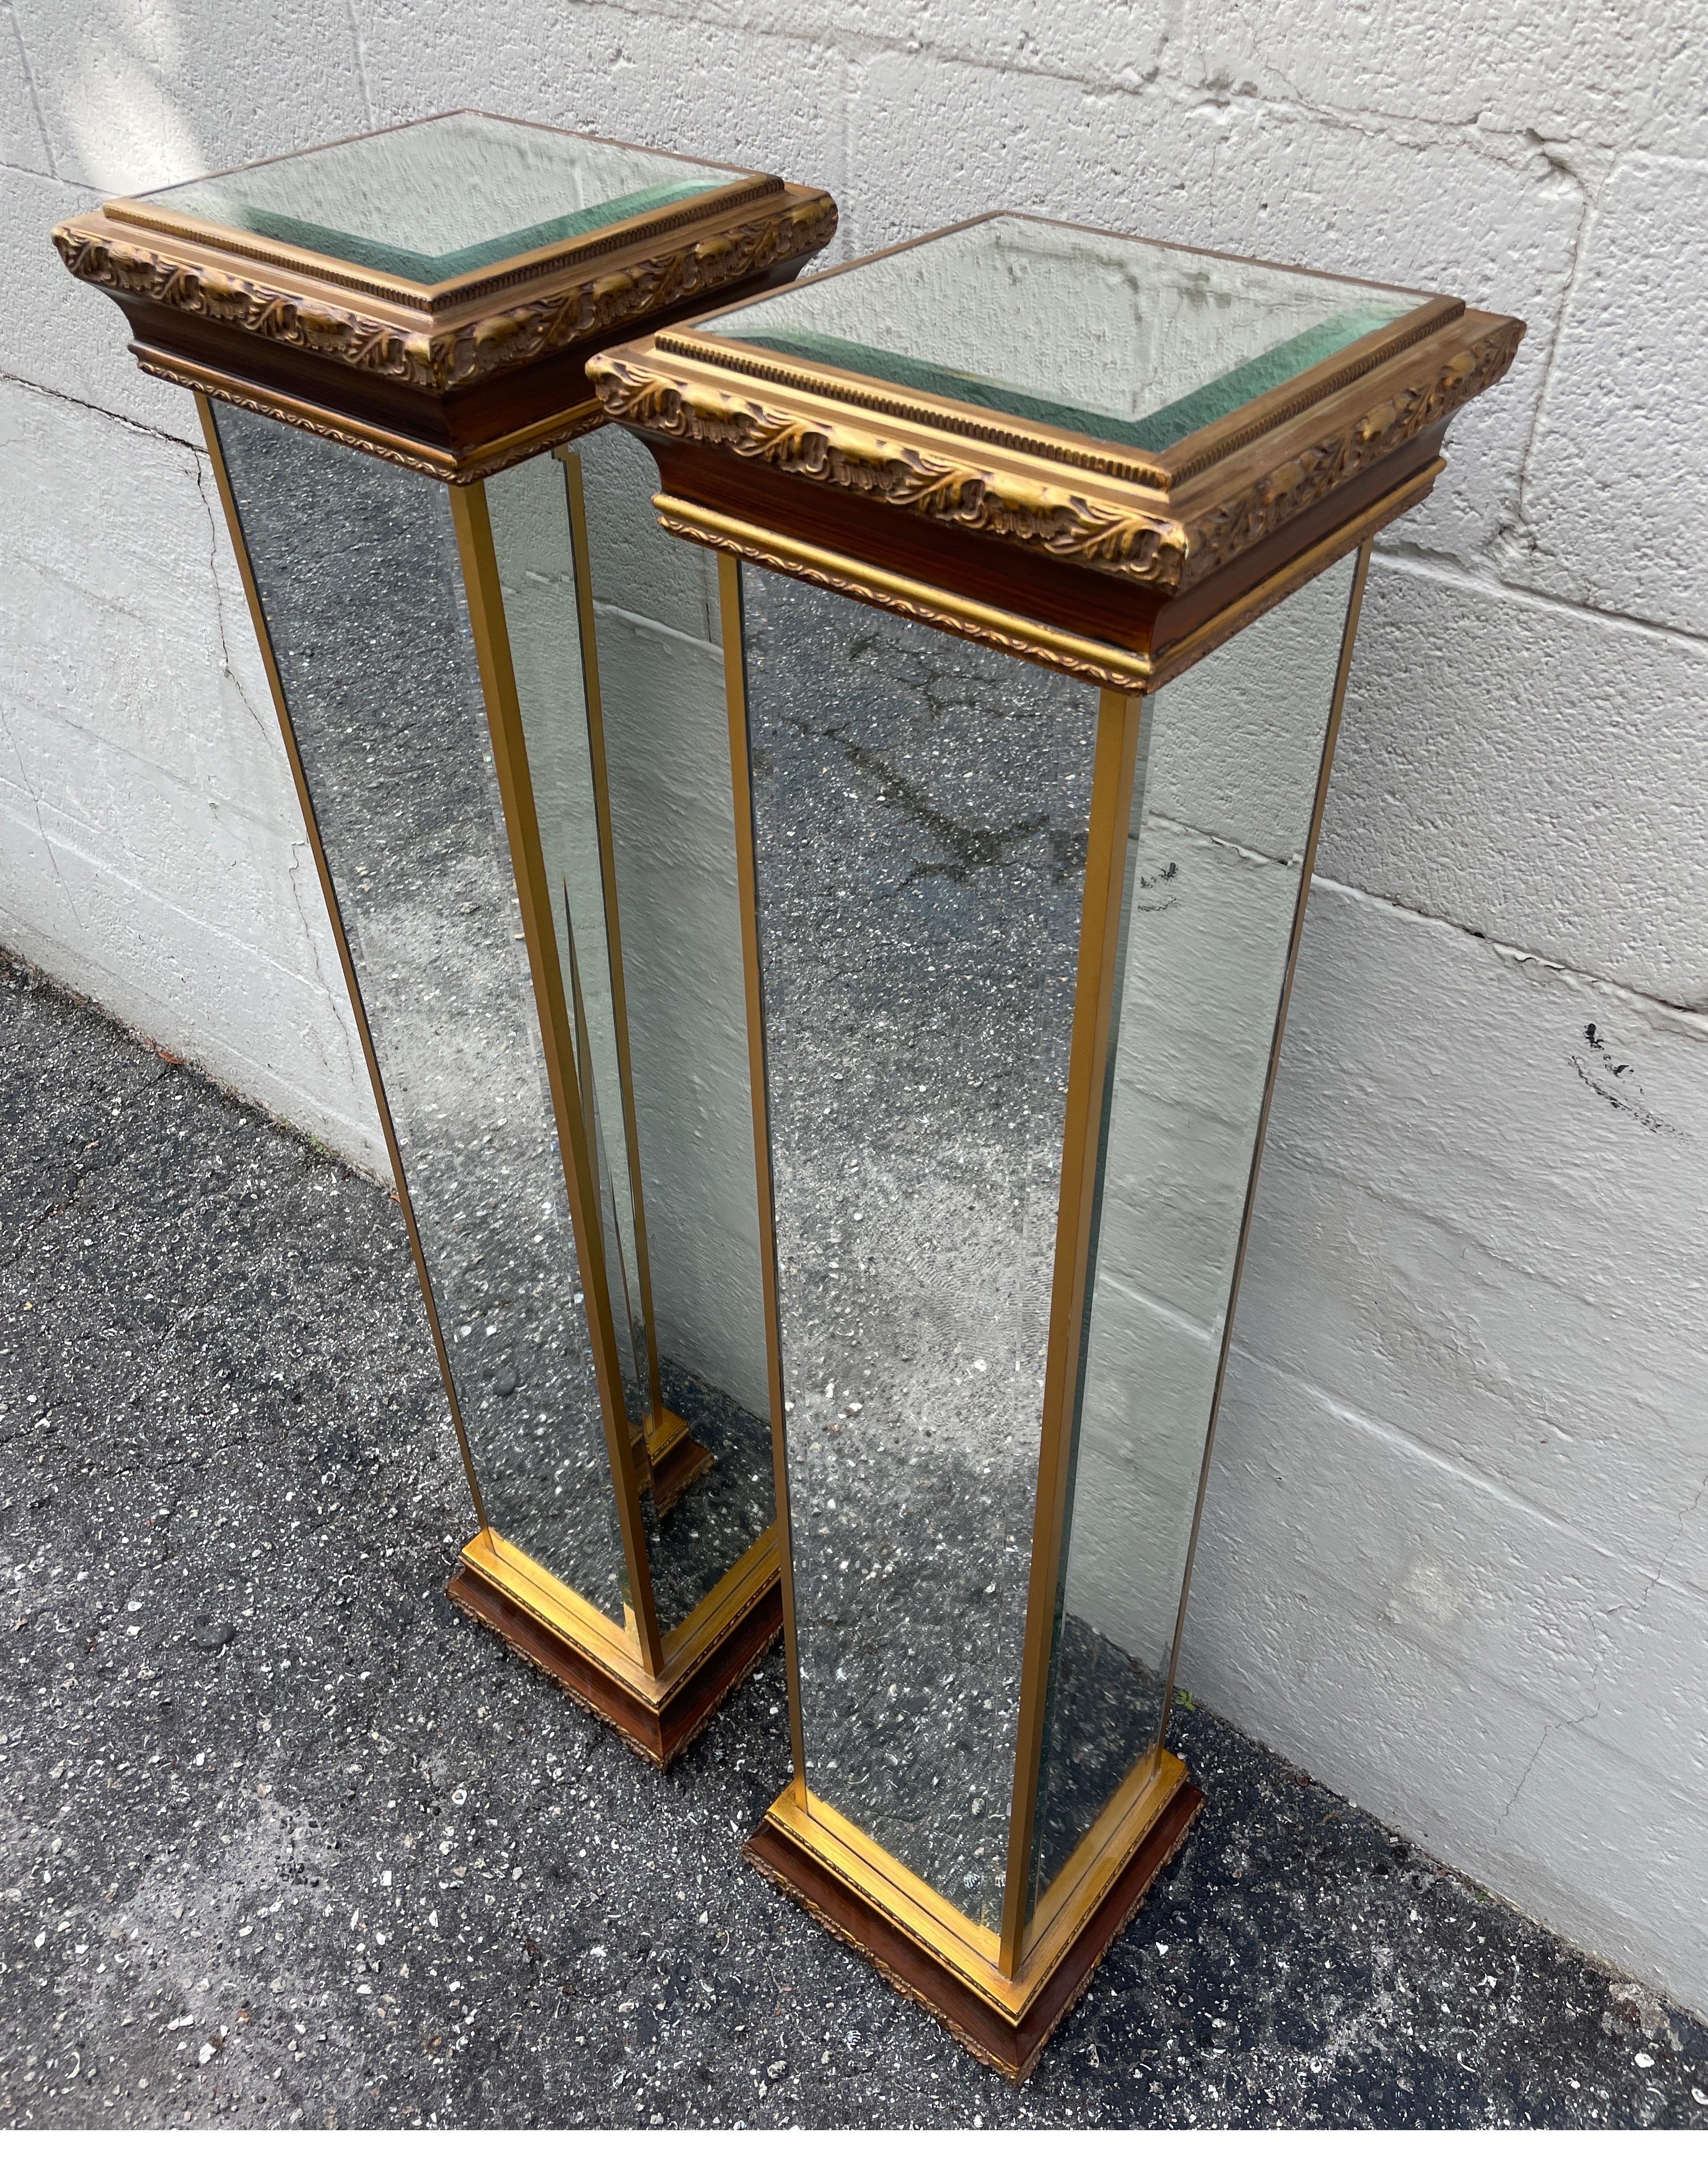 Pair of French Style Mirrored & Gilded Pedestals In Good Condition For Sale In West Palm Beach, FL